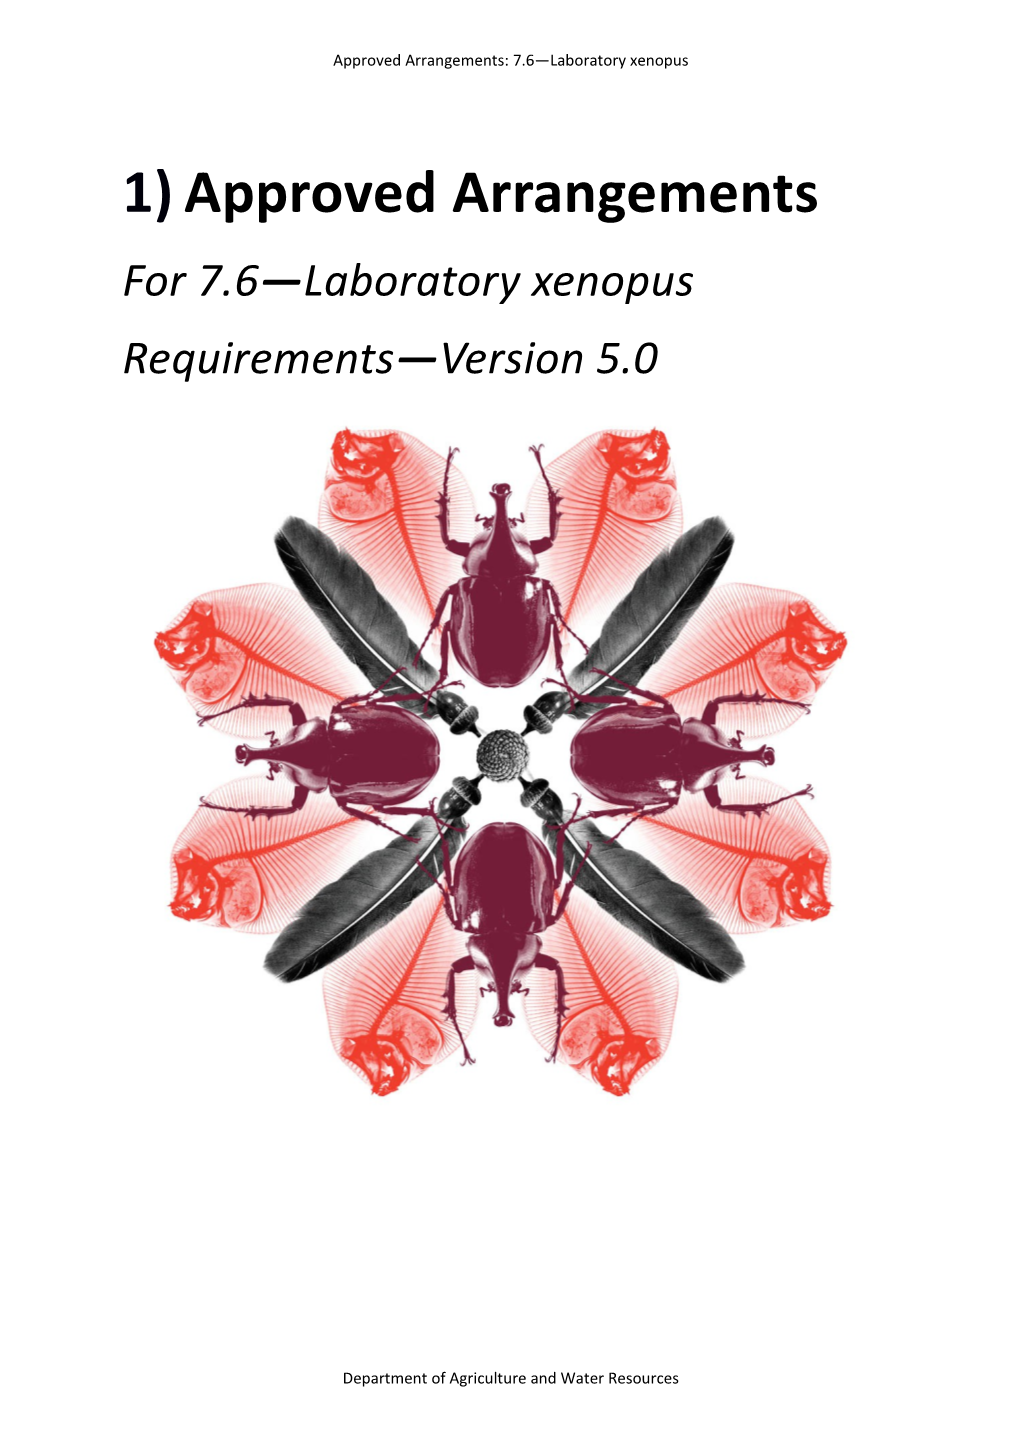 Approved Arrangements for 7.6: Laboratory Xenopus - Requirements